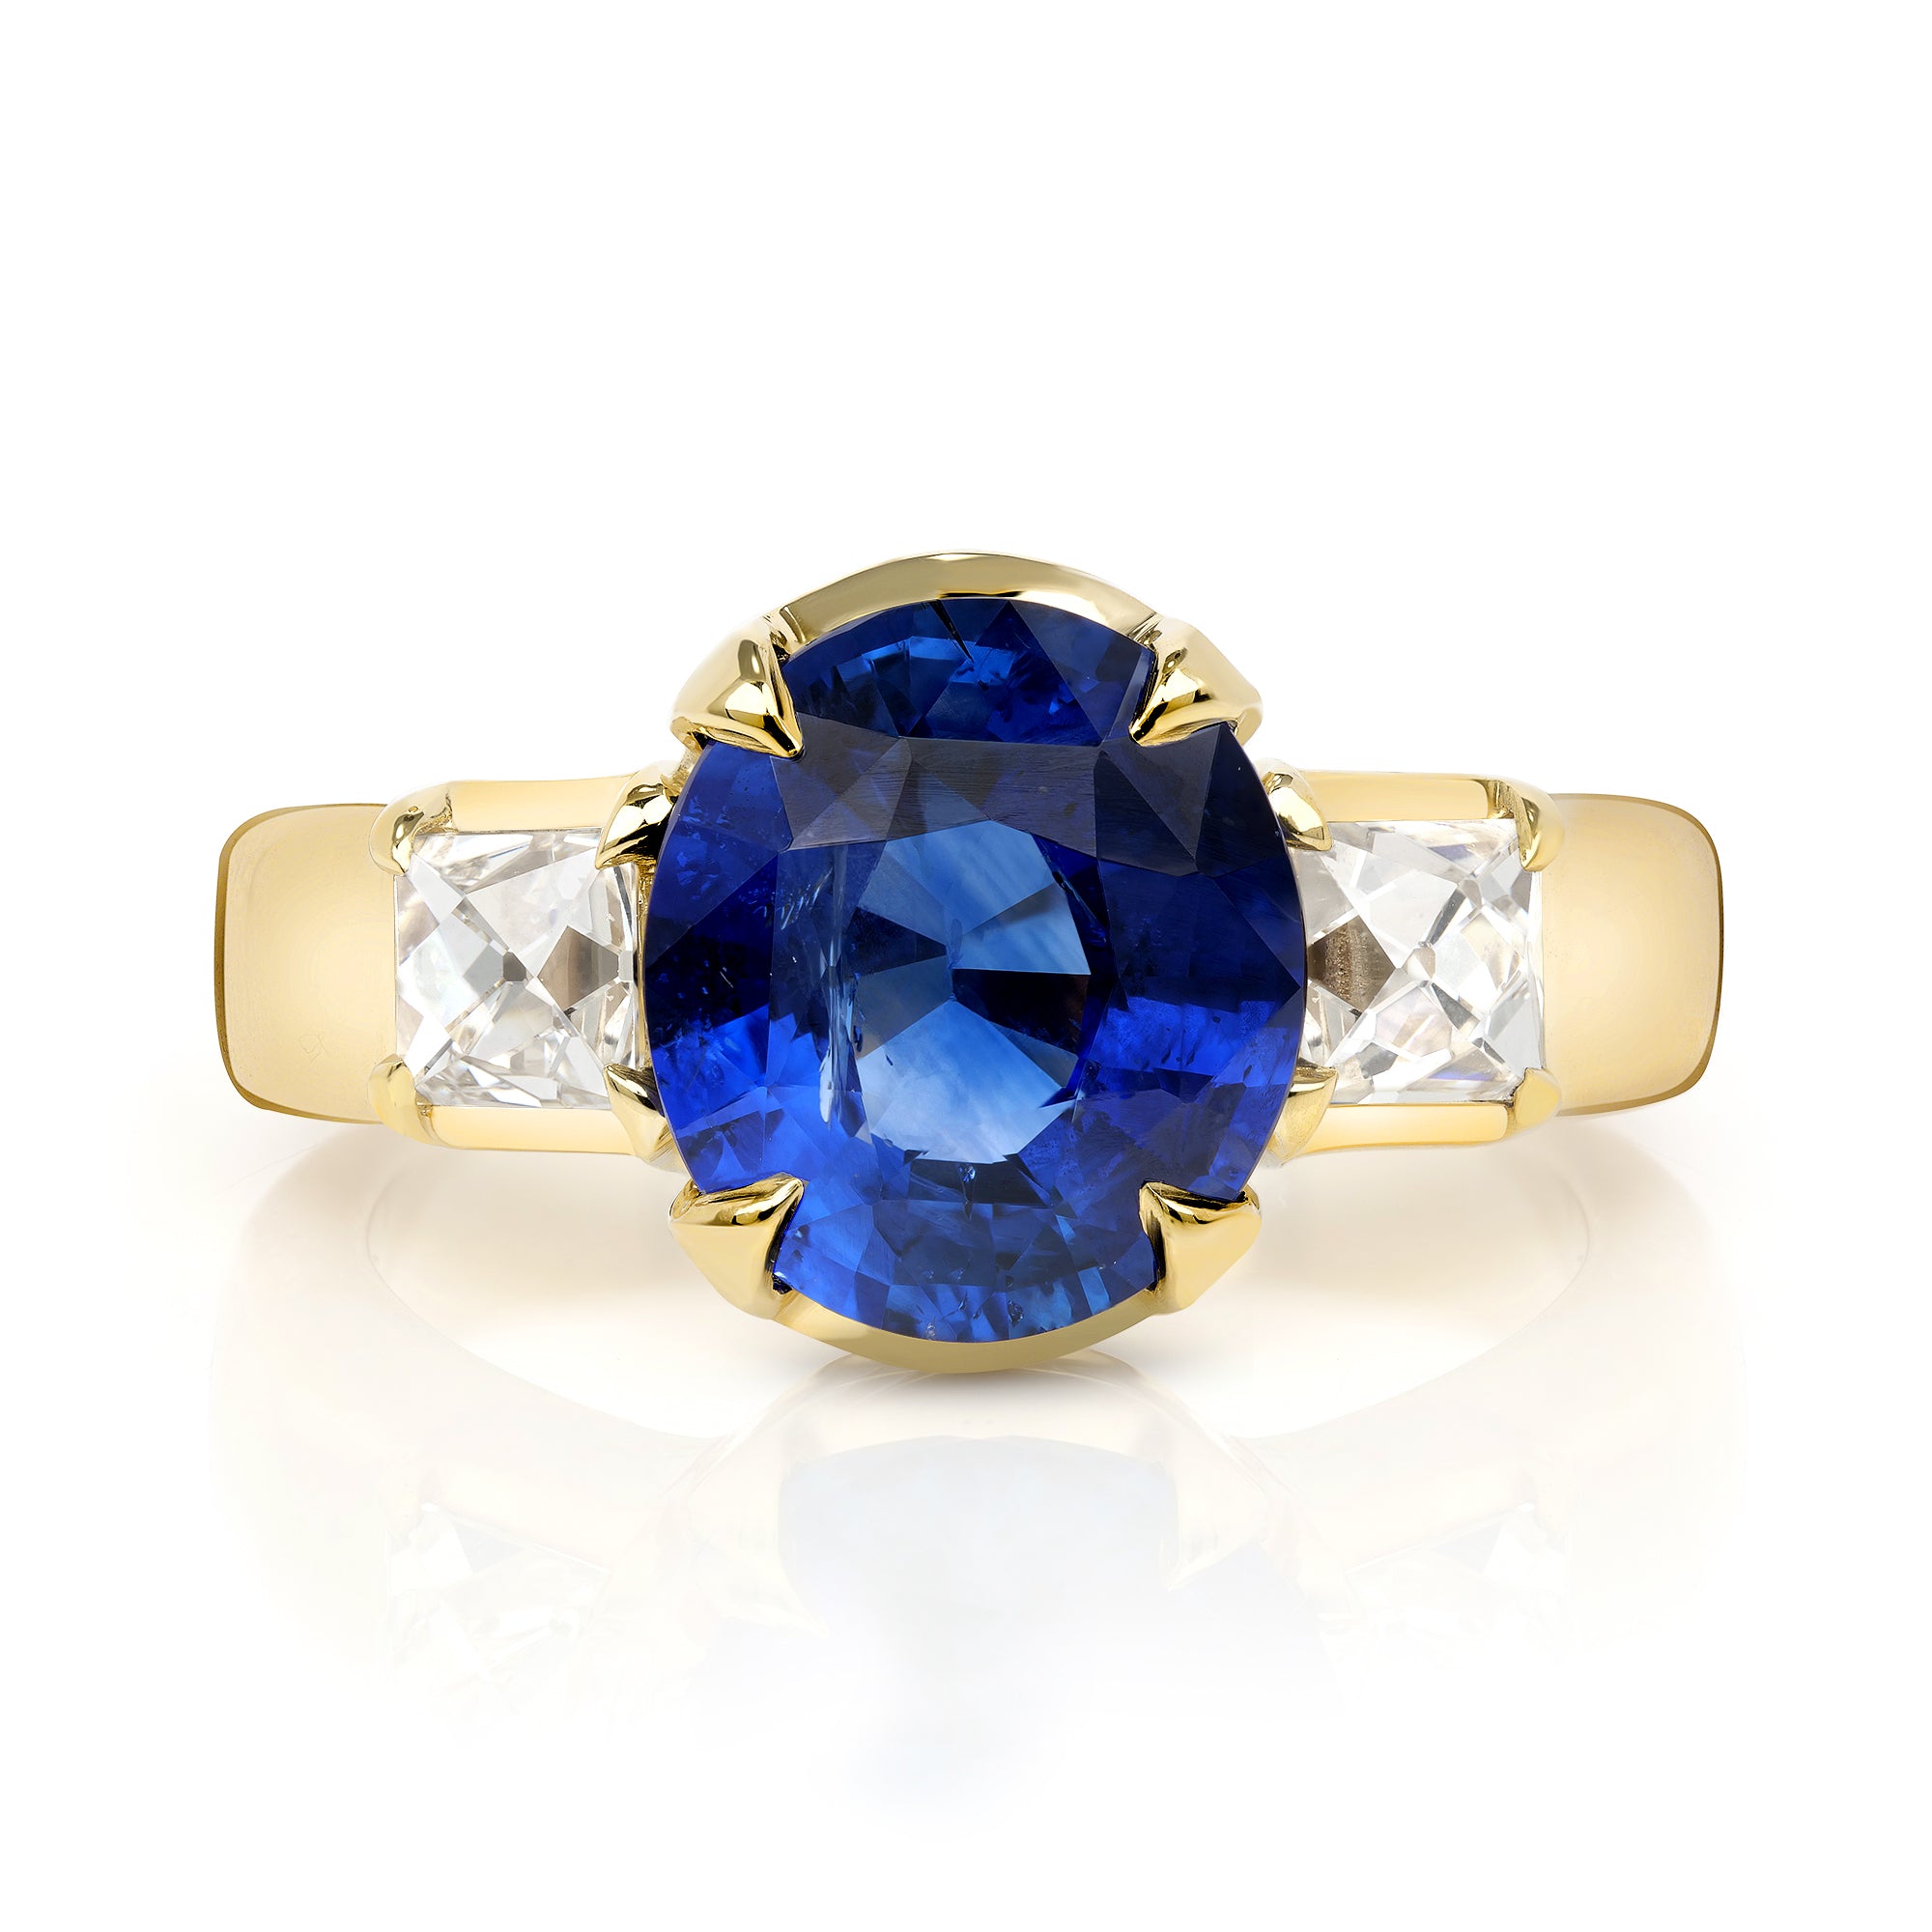 SINGLE STONE BROOKLYN RING featuring 3.24ct GIA certified Sri Lankan oval cut blue sapphire with 0.88ctw French cut accent diamonds prong set in a handcrafted 18K yellow gold mounting.